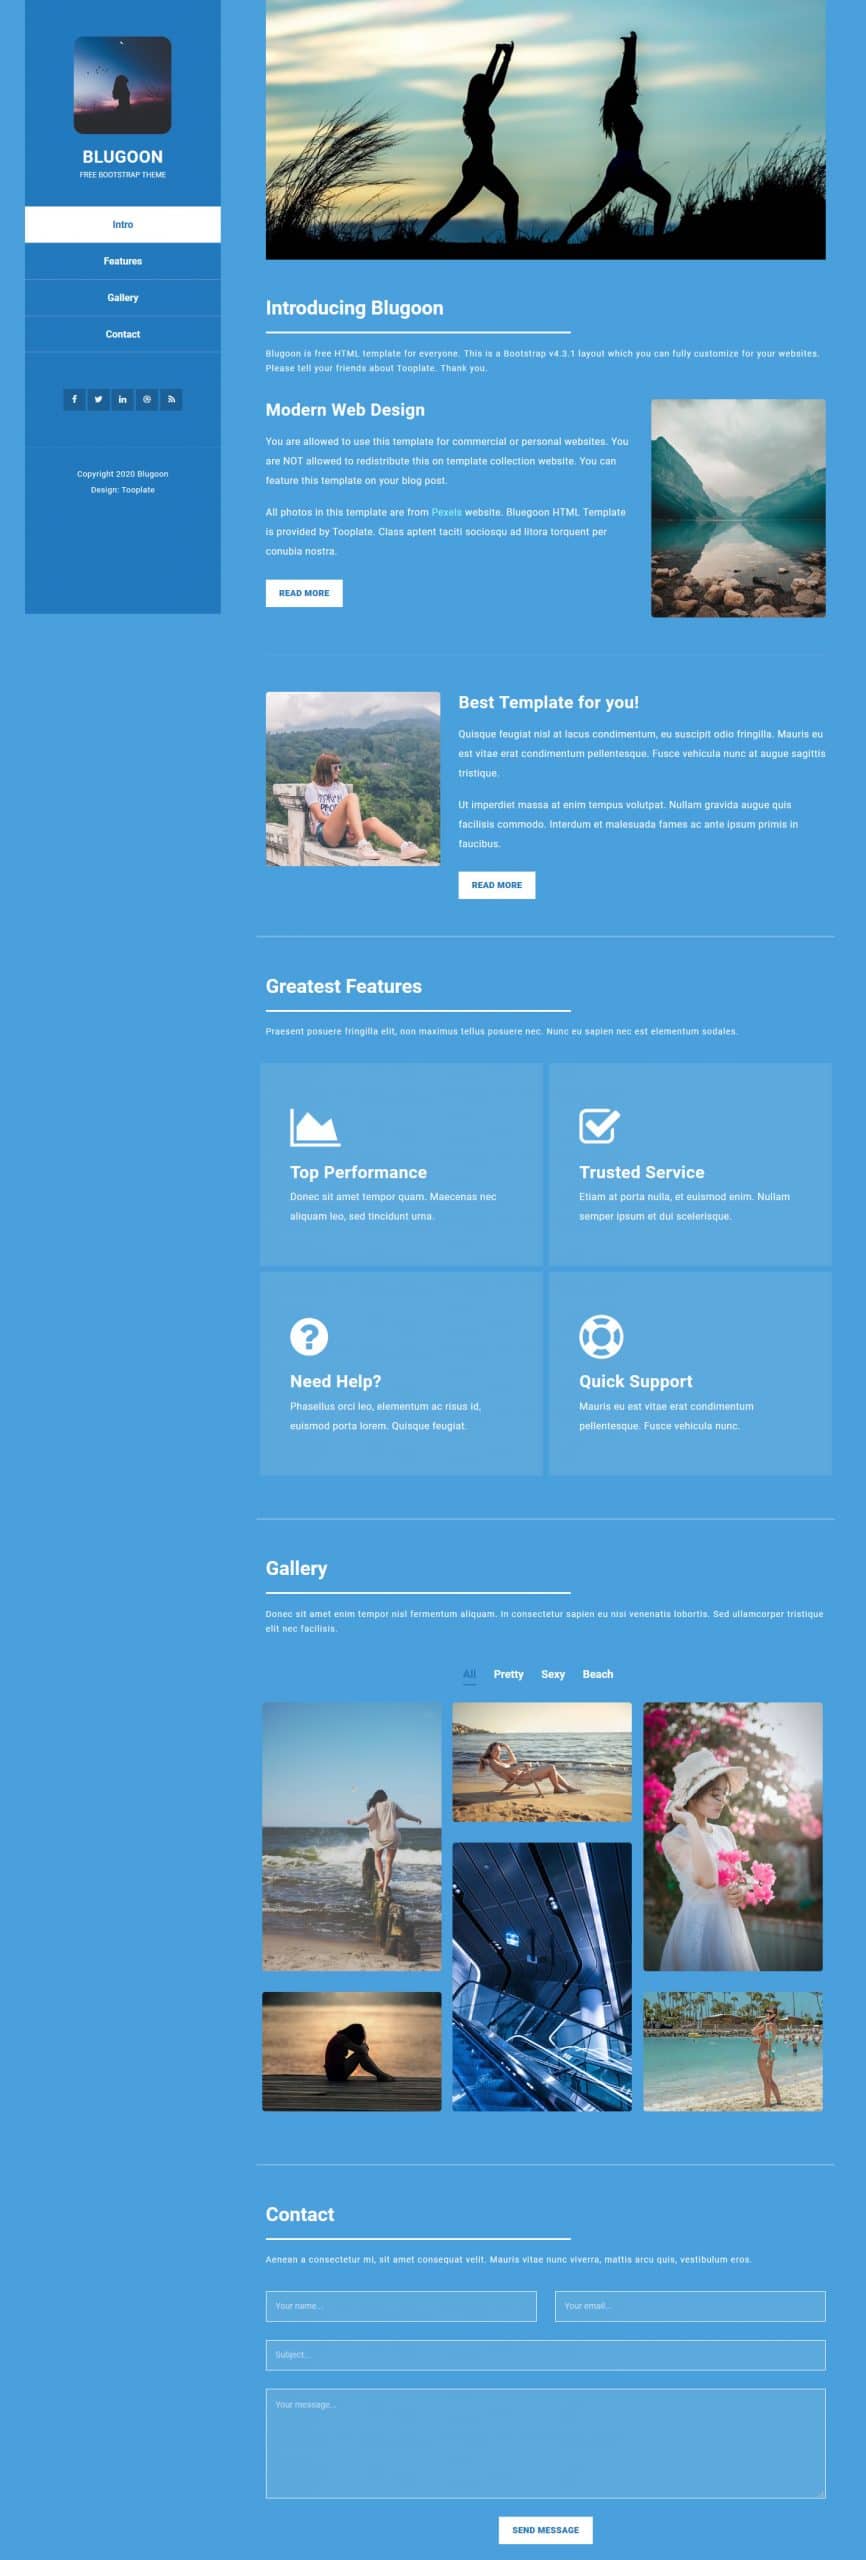 Blugoon - one-page layout HTML template